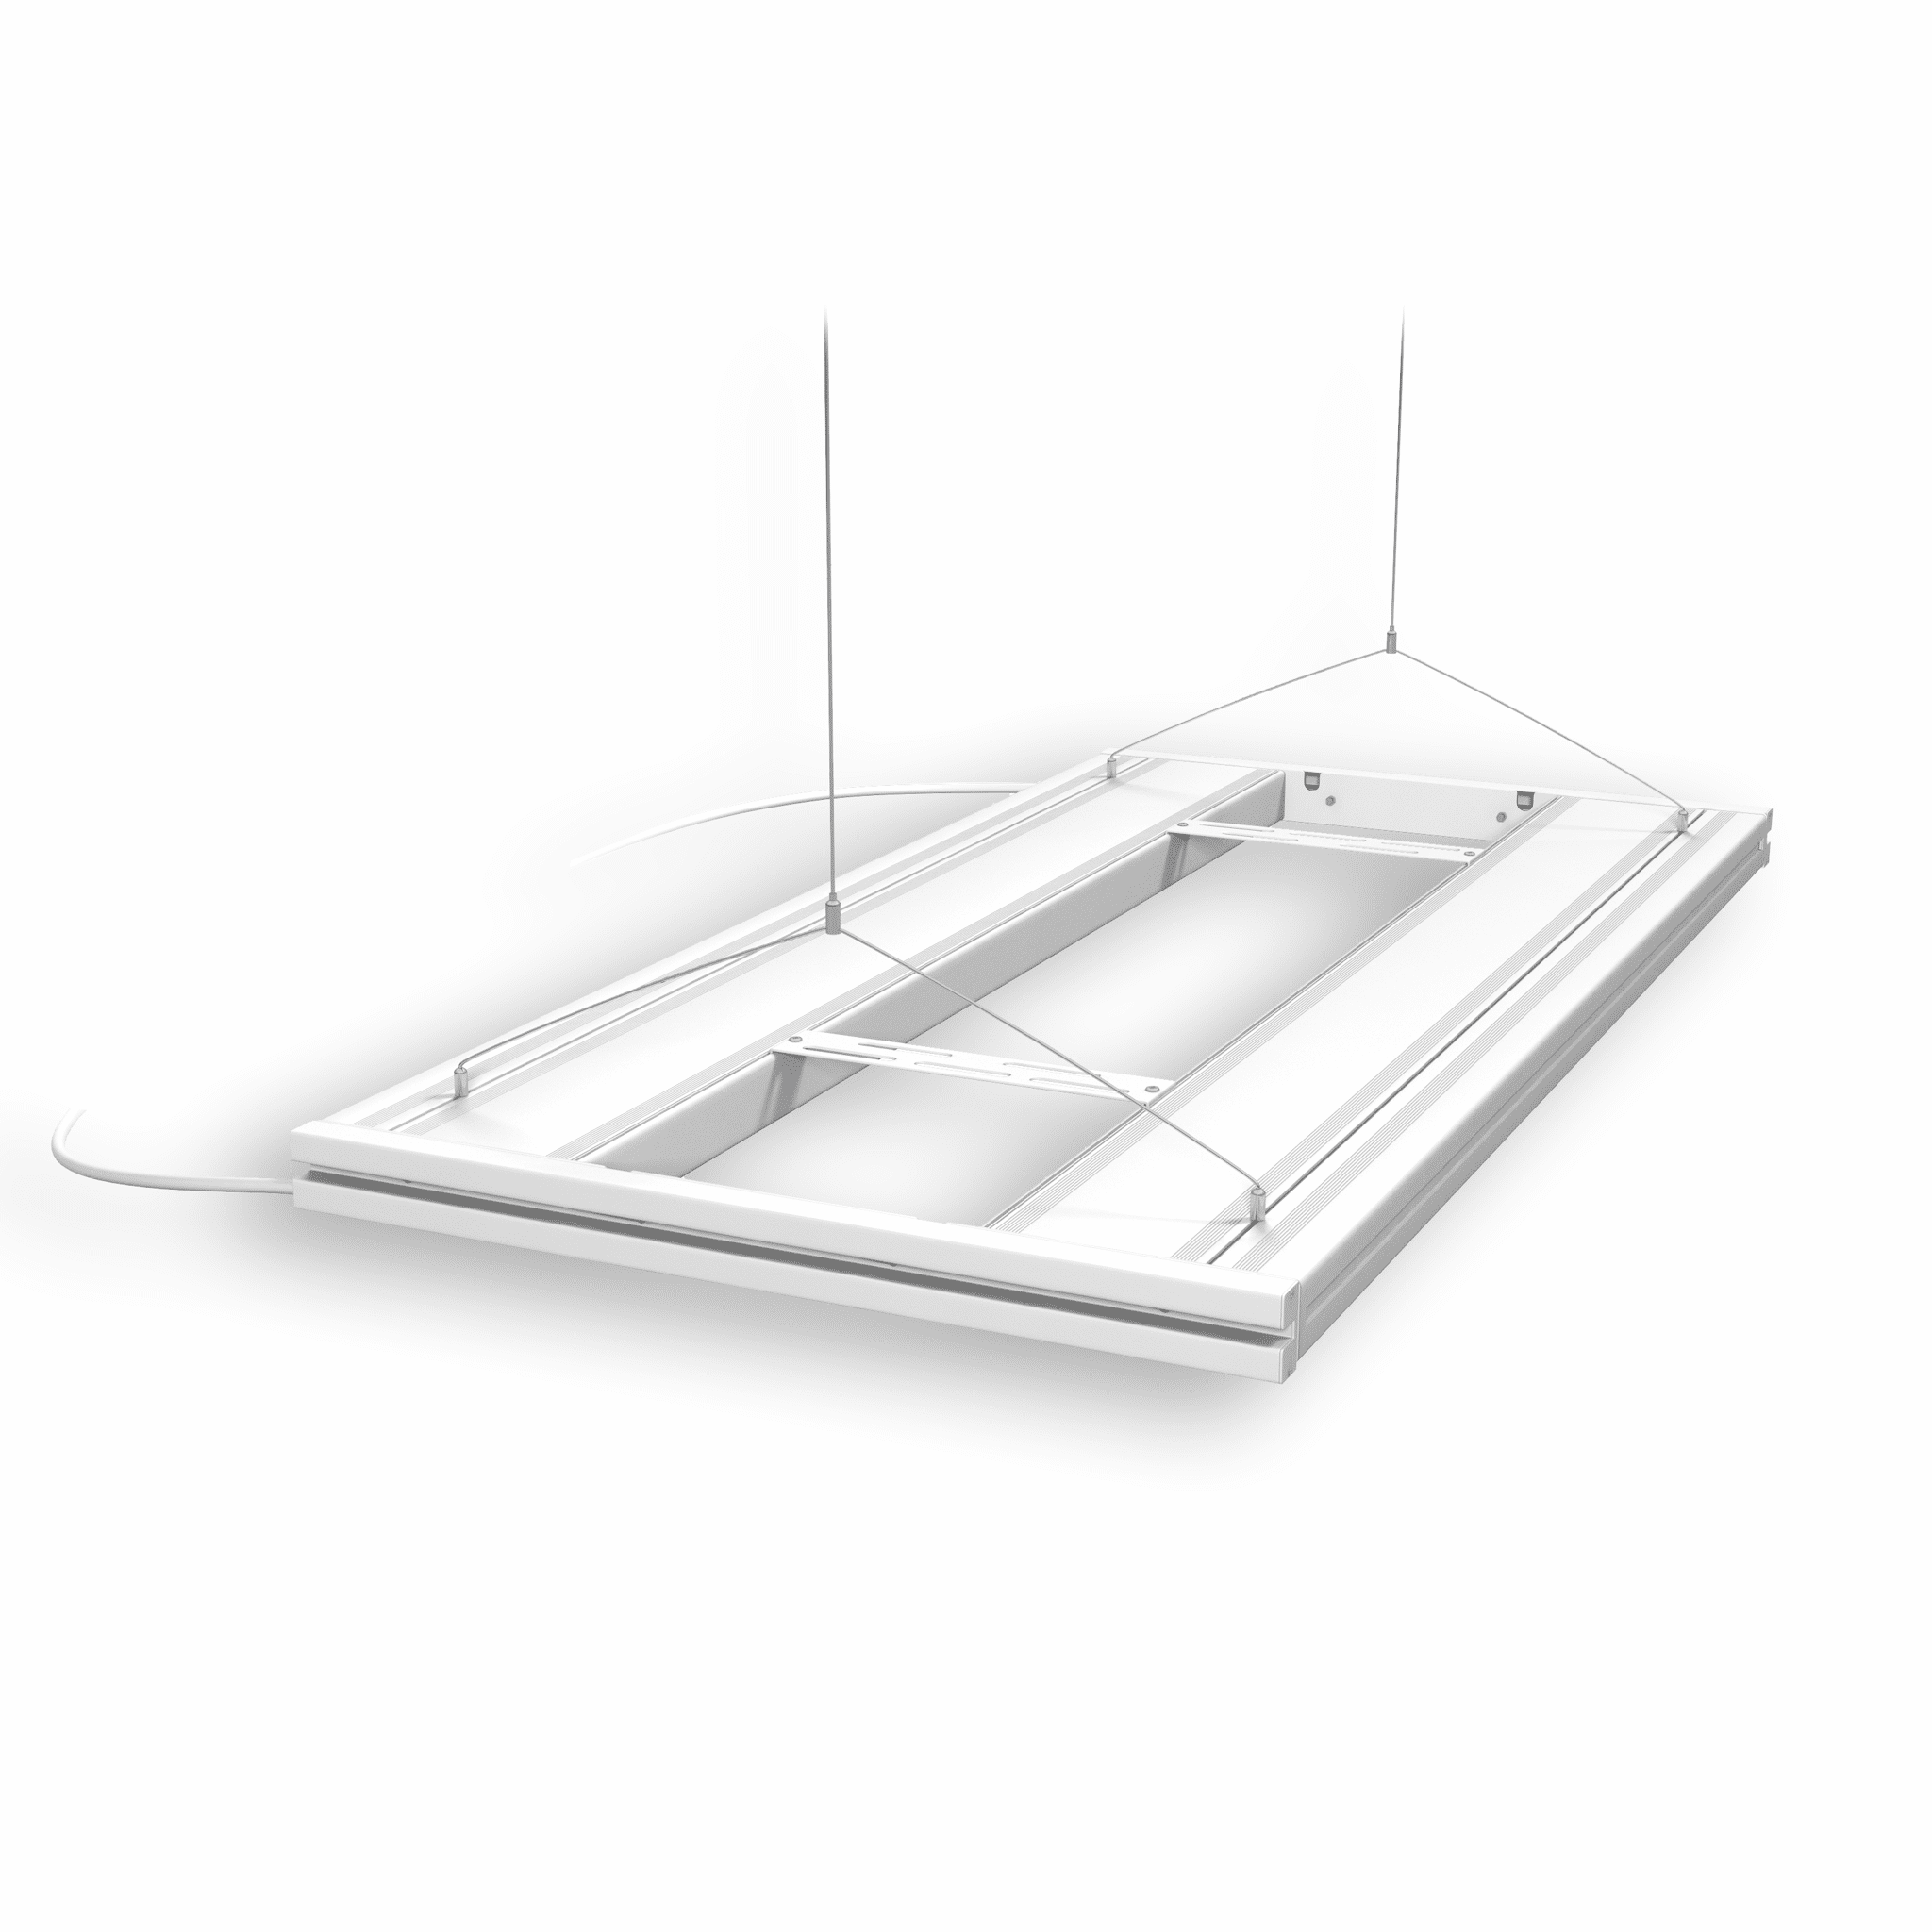 Picture of Hybrid fixture T5HO Aquatic Life 4 x 80W, 1524 mm / 61", White